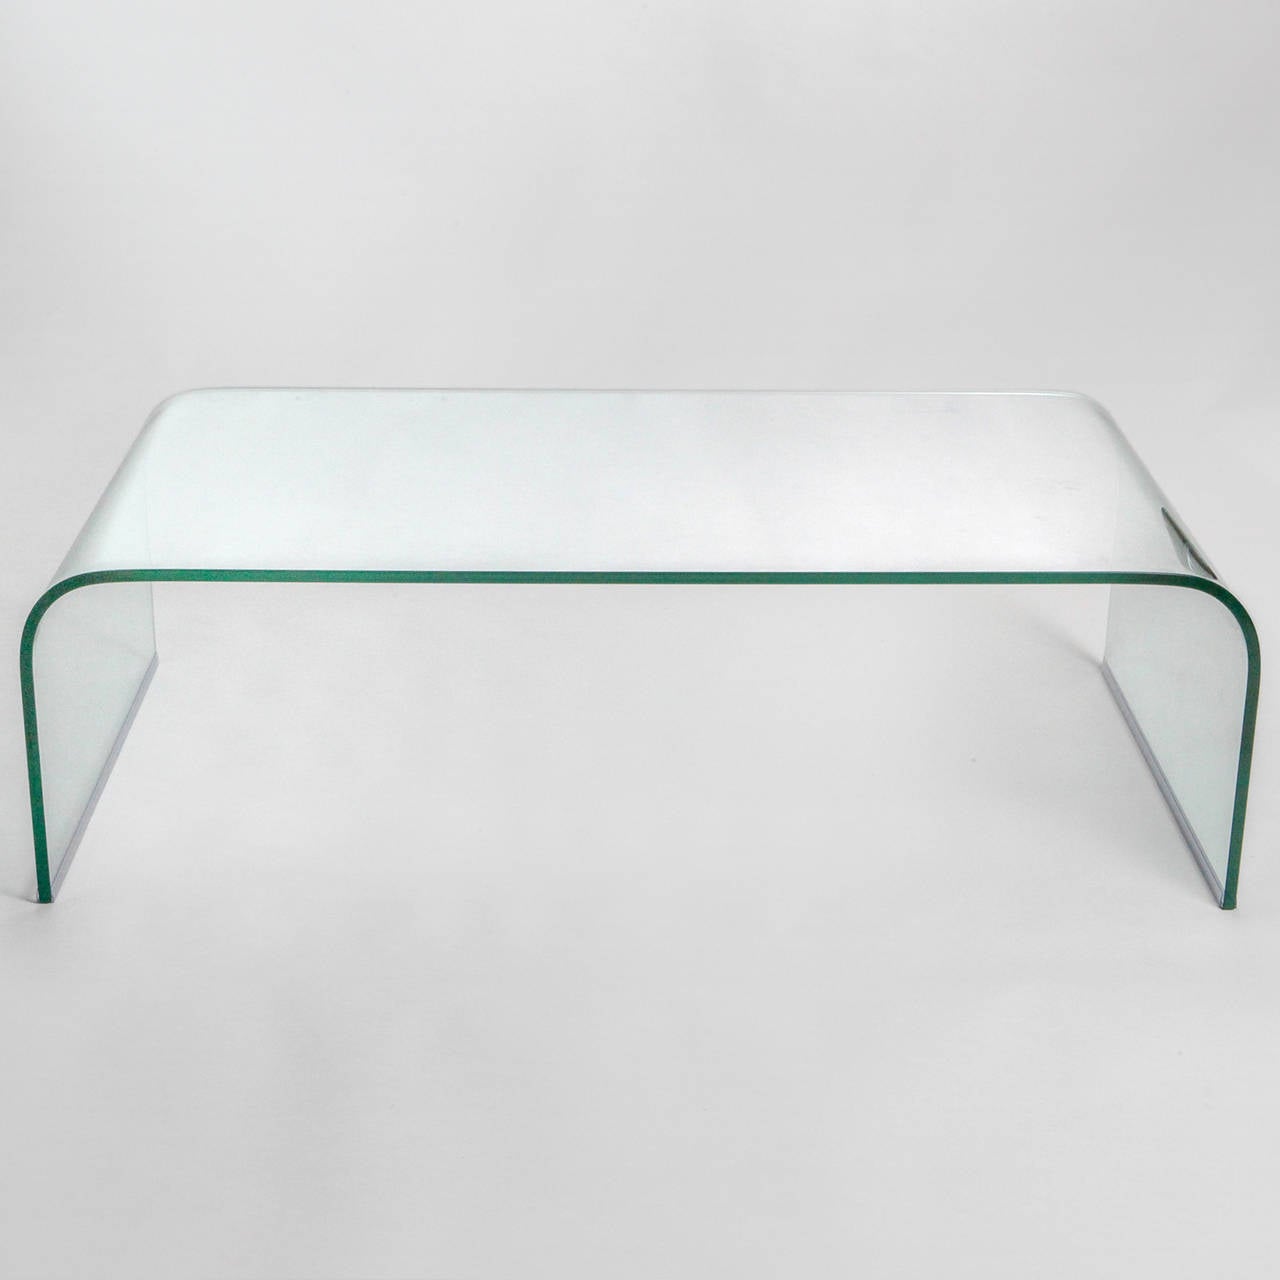 Sleek glass coffee table with Classic curved sides.